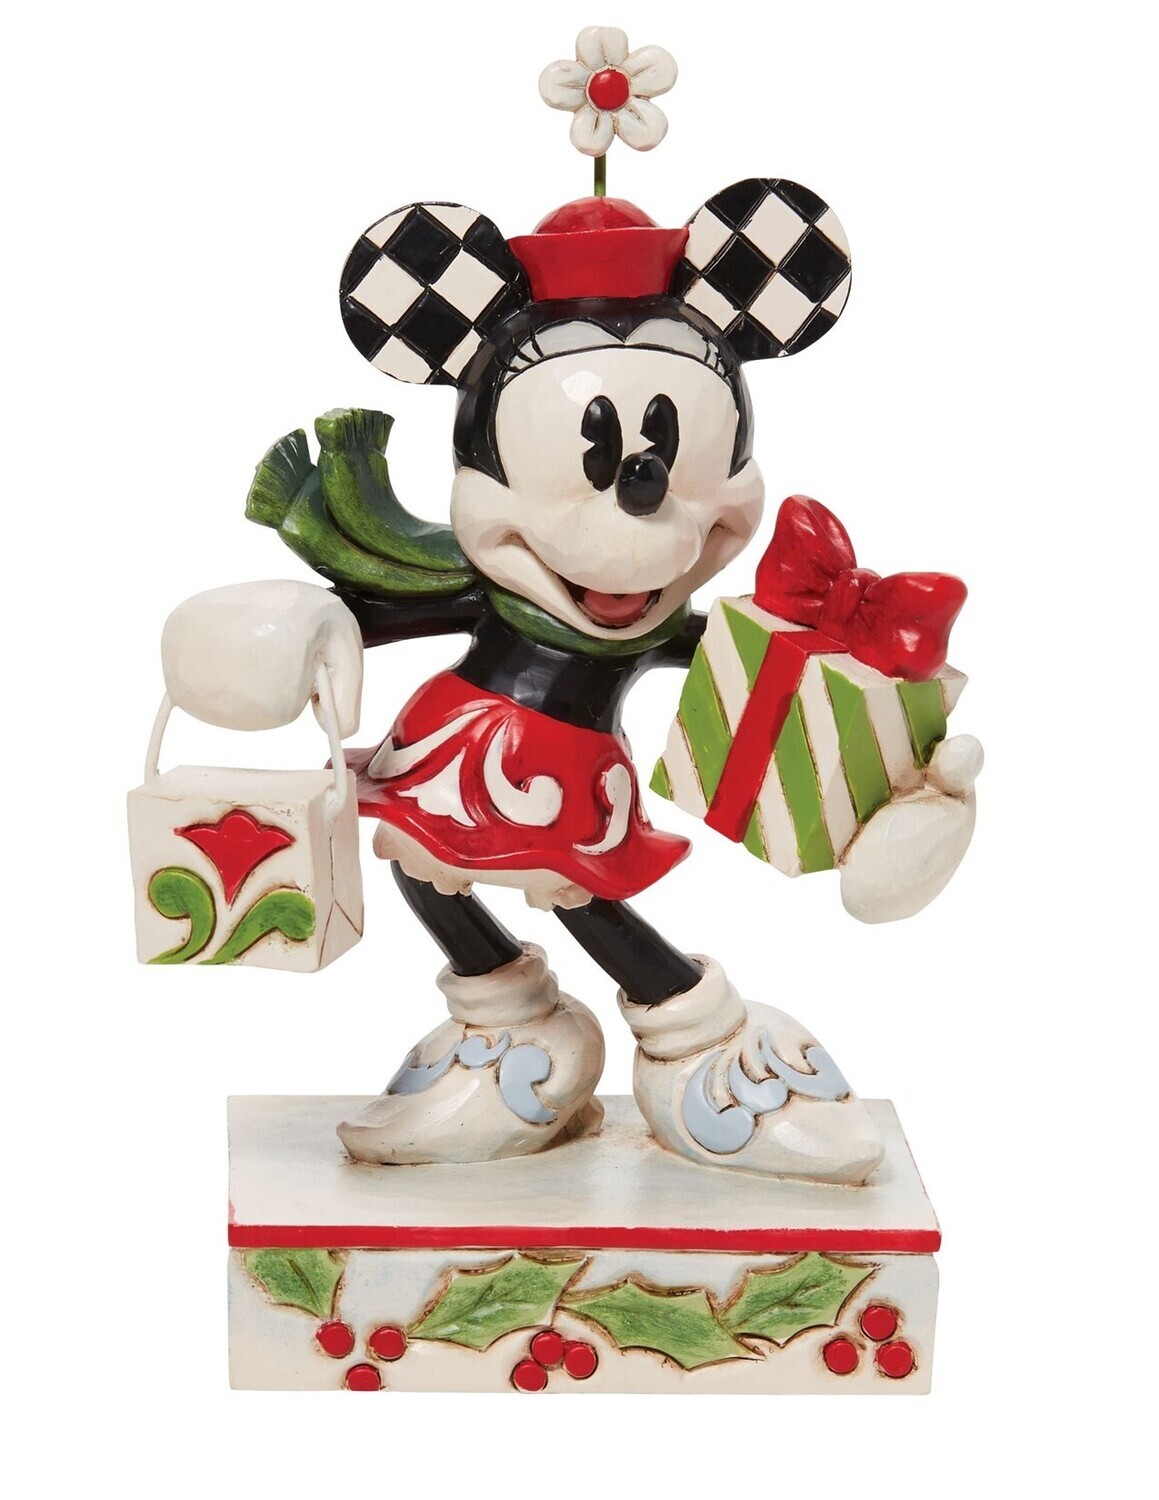 Jim Shore Disney Traditions "Minnie with Bag and Gift" Figurine (6010870)